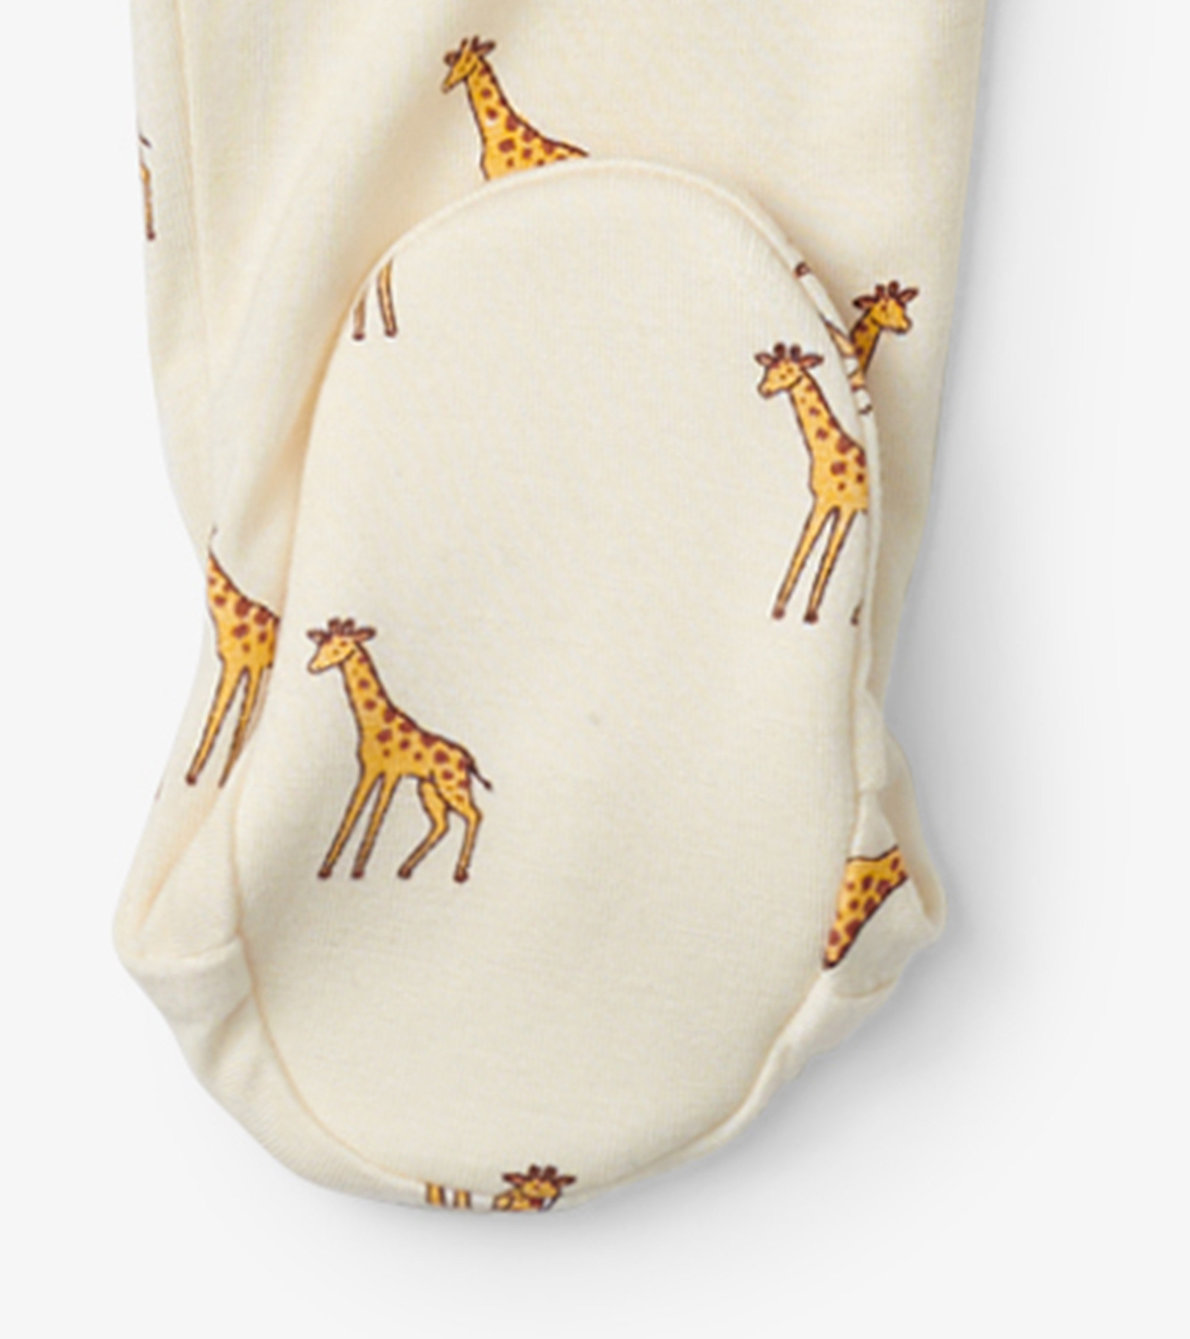 View larger image of Baby Boys Little Giraffes Footed Sleeper